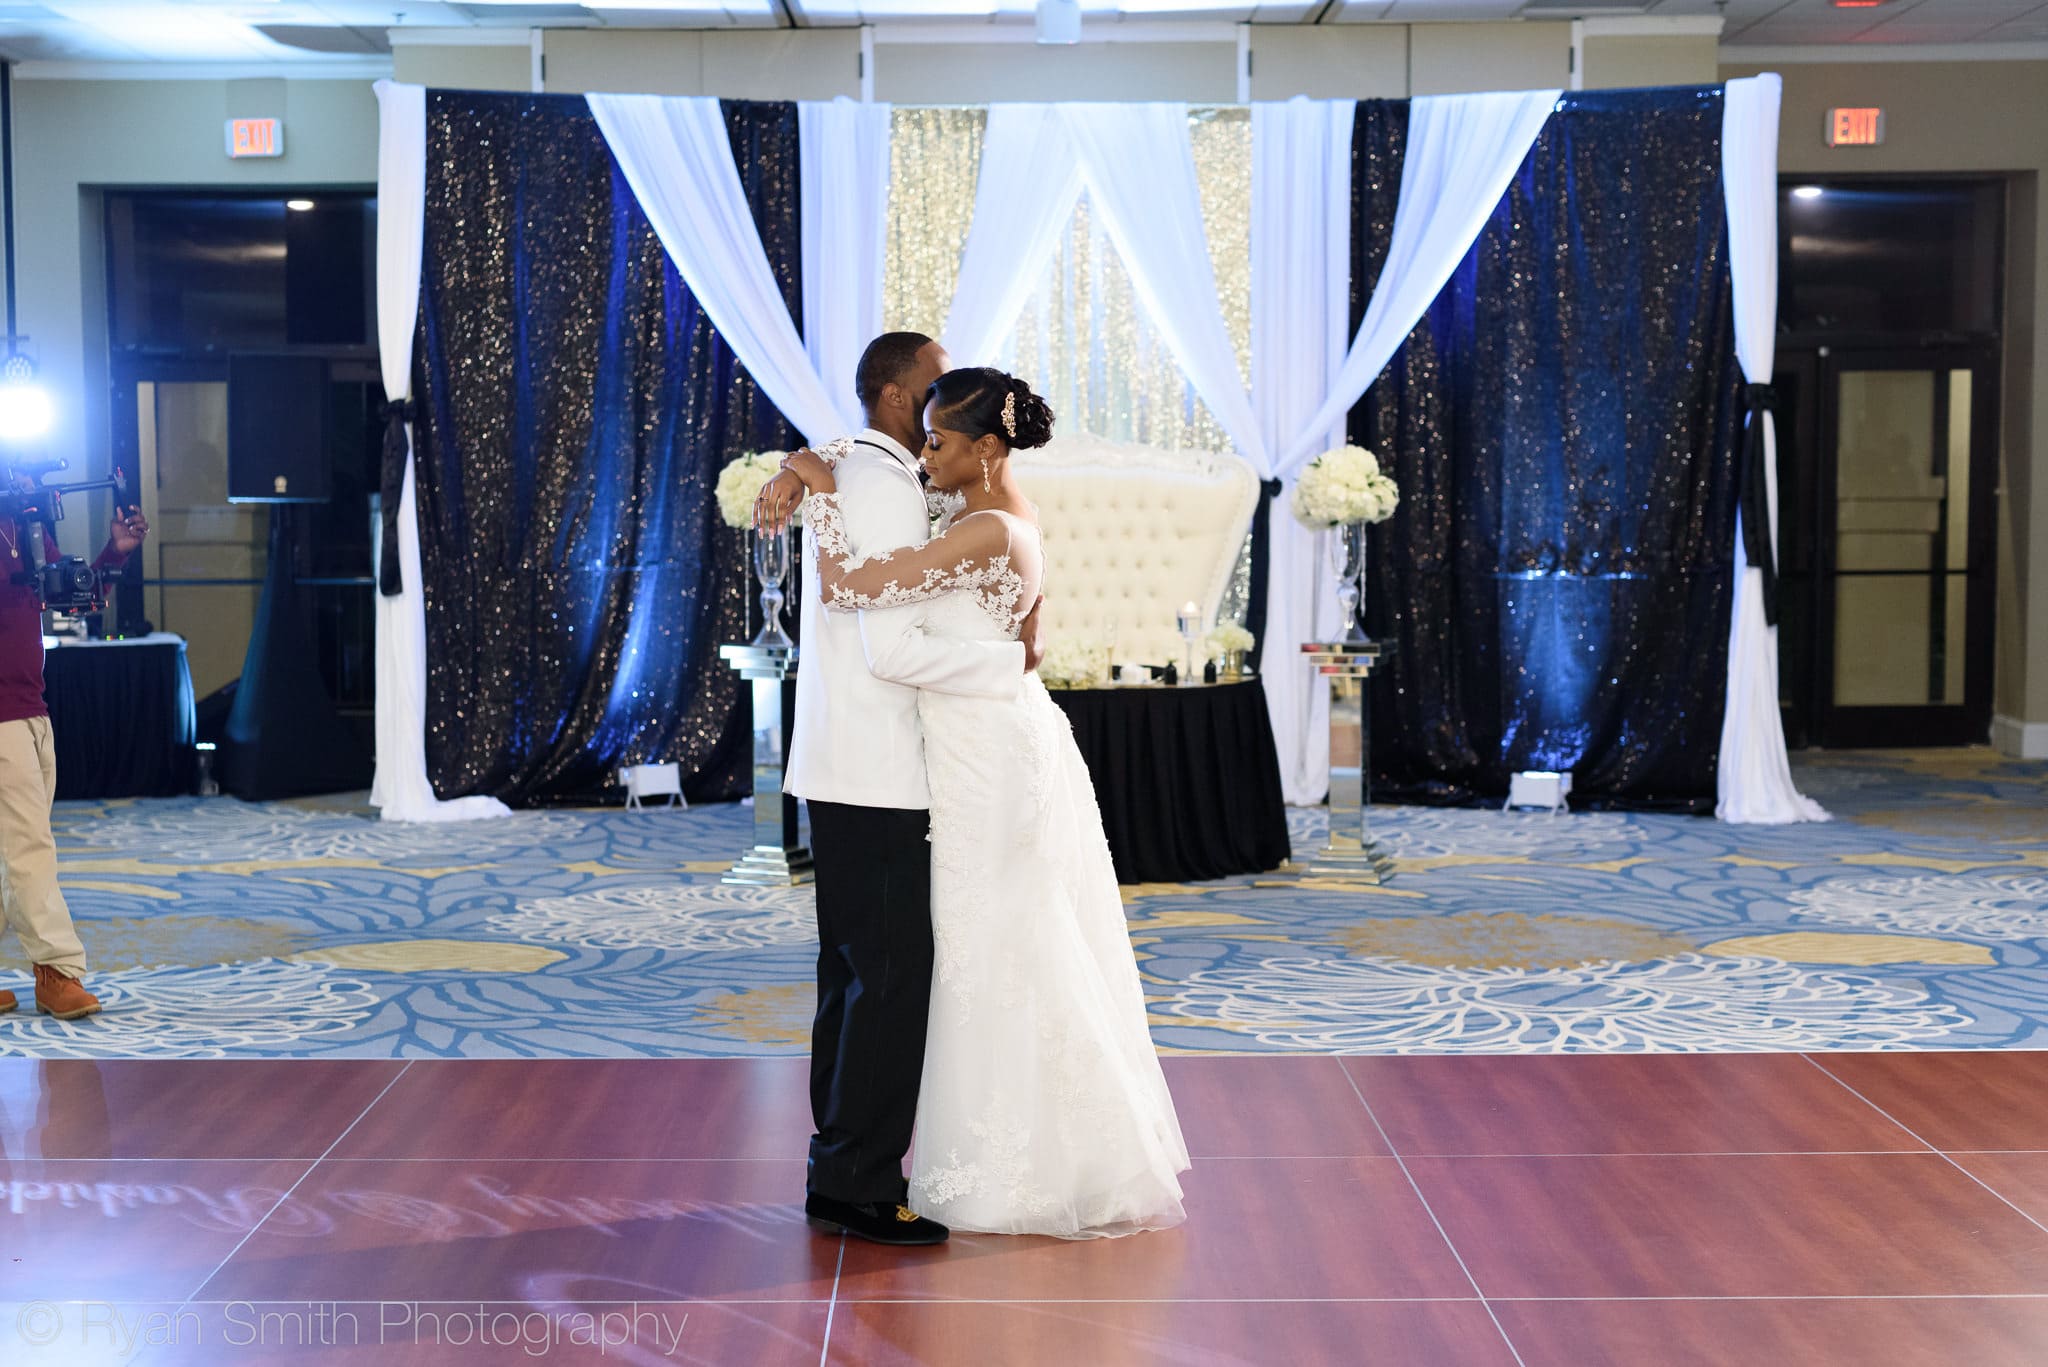 Hug during first dance - Doubletree Resort by Hilton Myrtle Beach